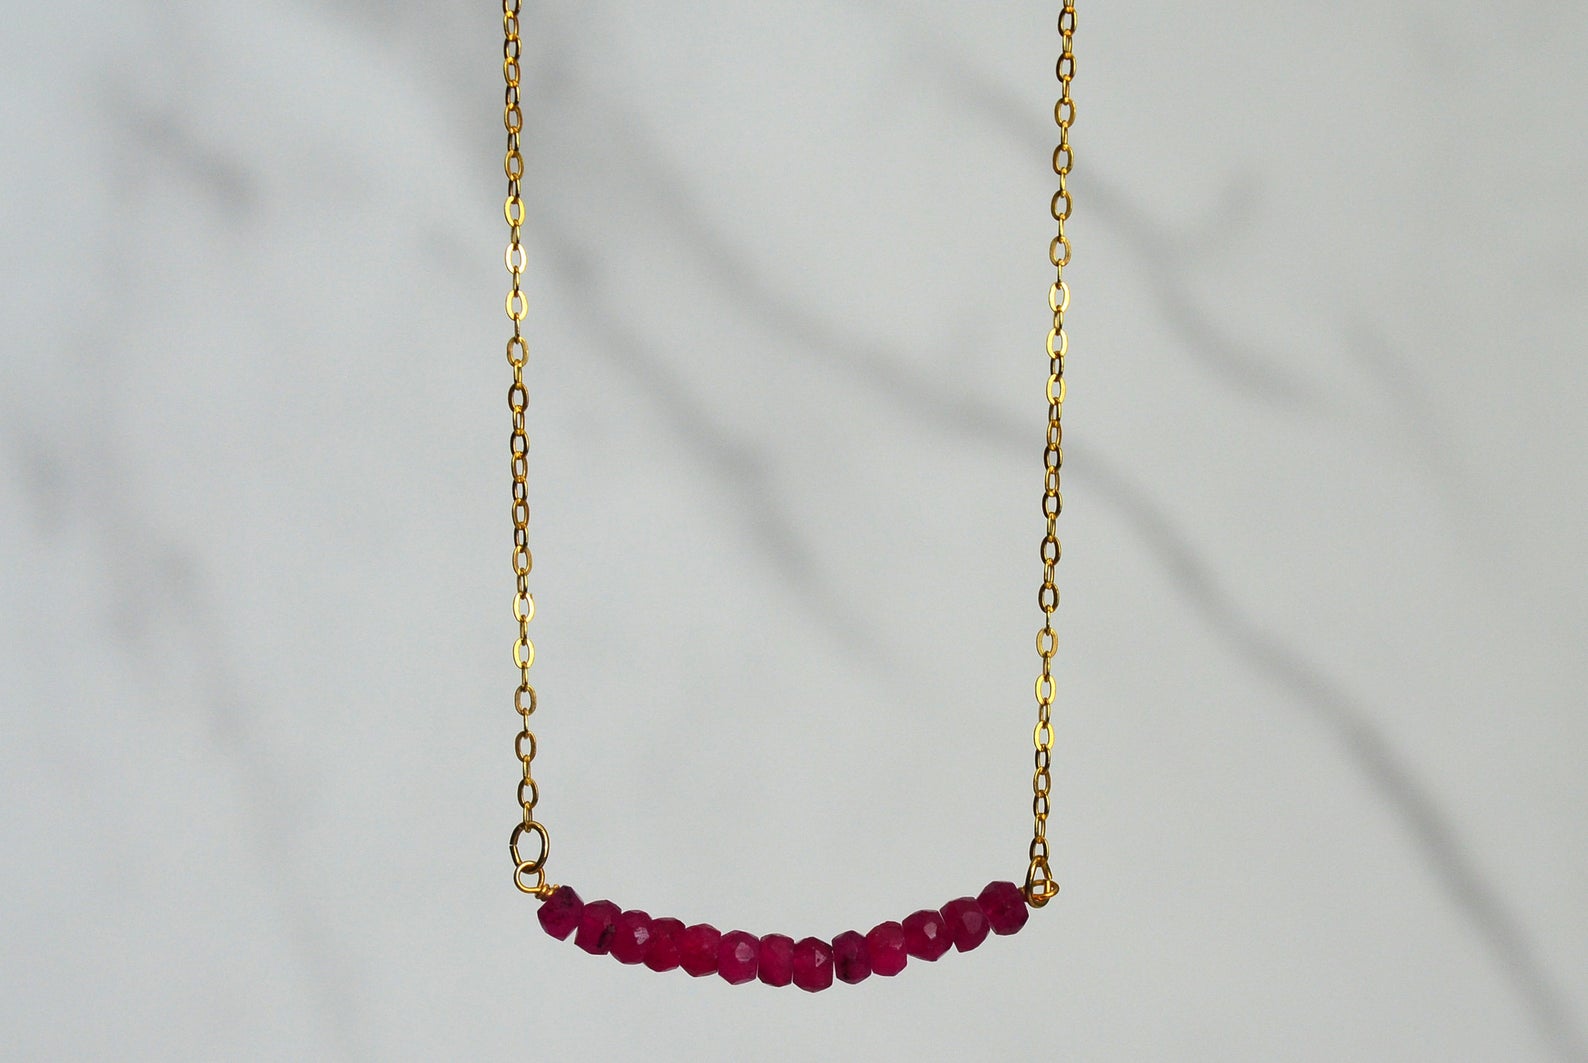 Buy Dainty Ruby Necklace Gold, Gold Ruby Pendant, Tiny Ruby Necklace, Gold  Layer Necklace, 14k Gold Filled Paperclip Chain, Ruby Teardrop Online in  India - Etsy